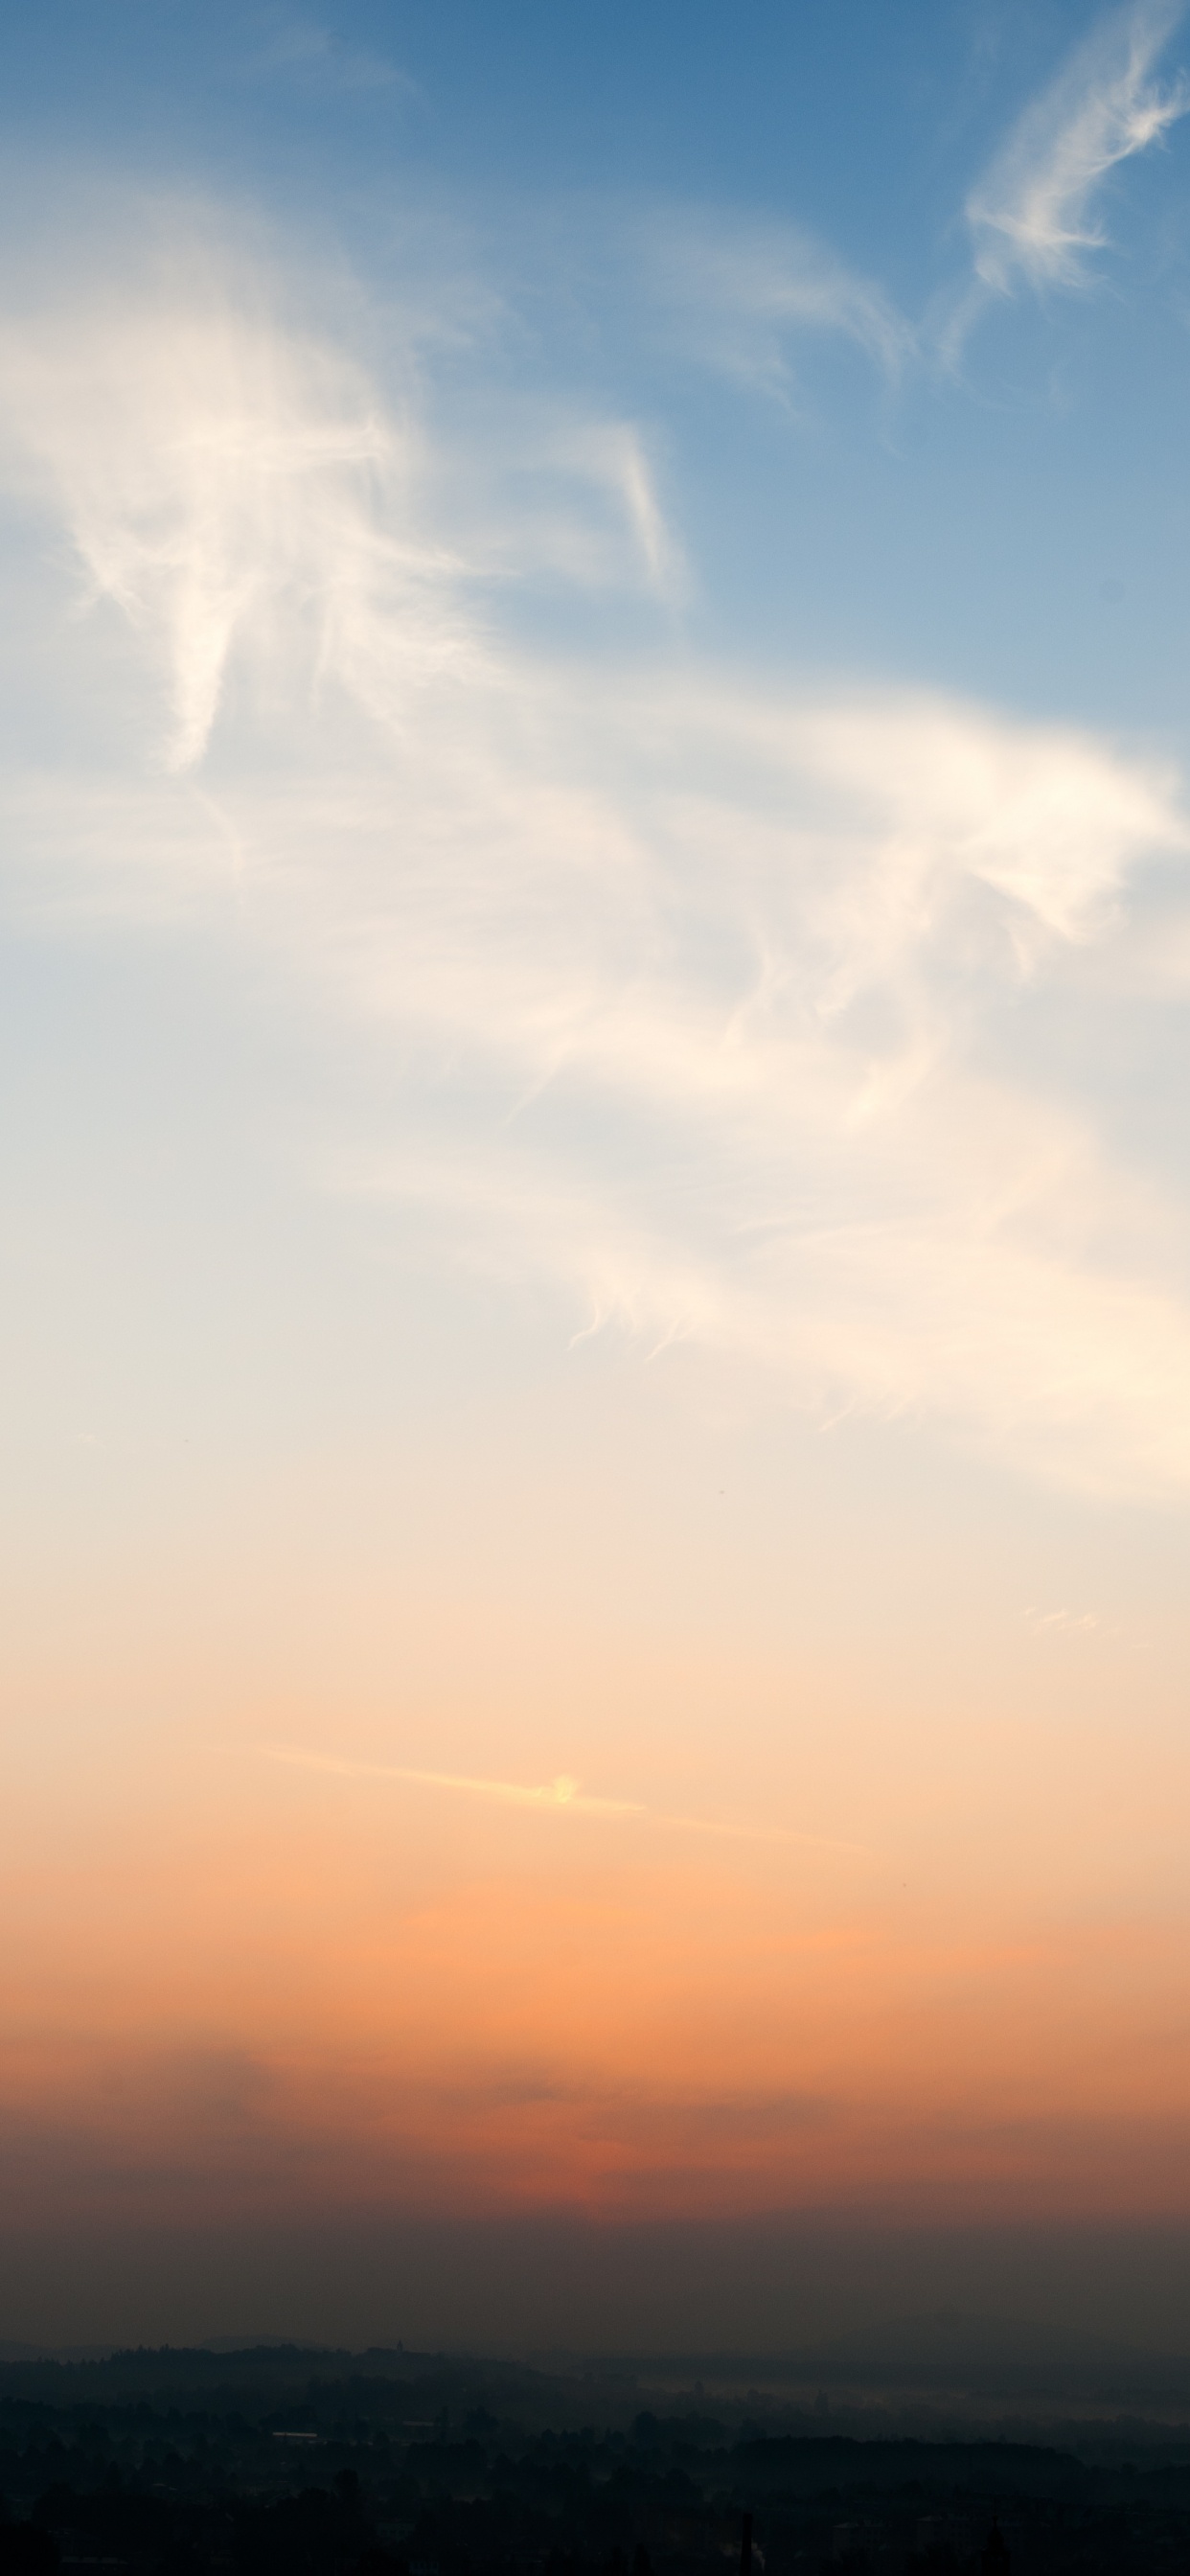 White Clouds and Blue Sky During Daytime. Wallpaper in 1242x2688 Resolution